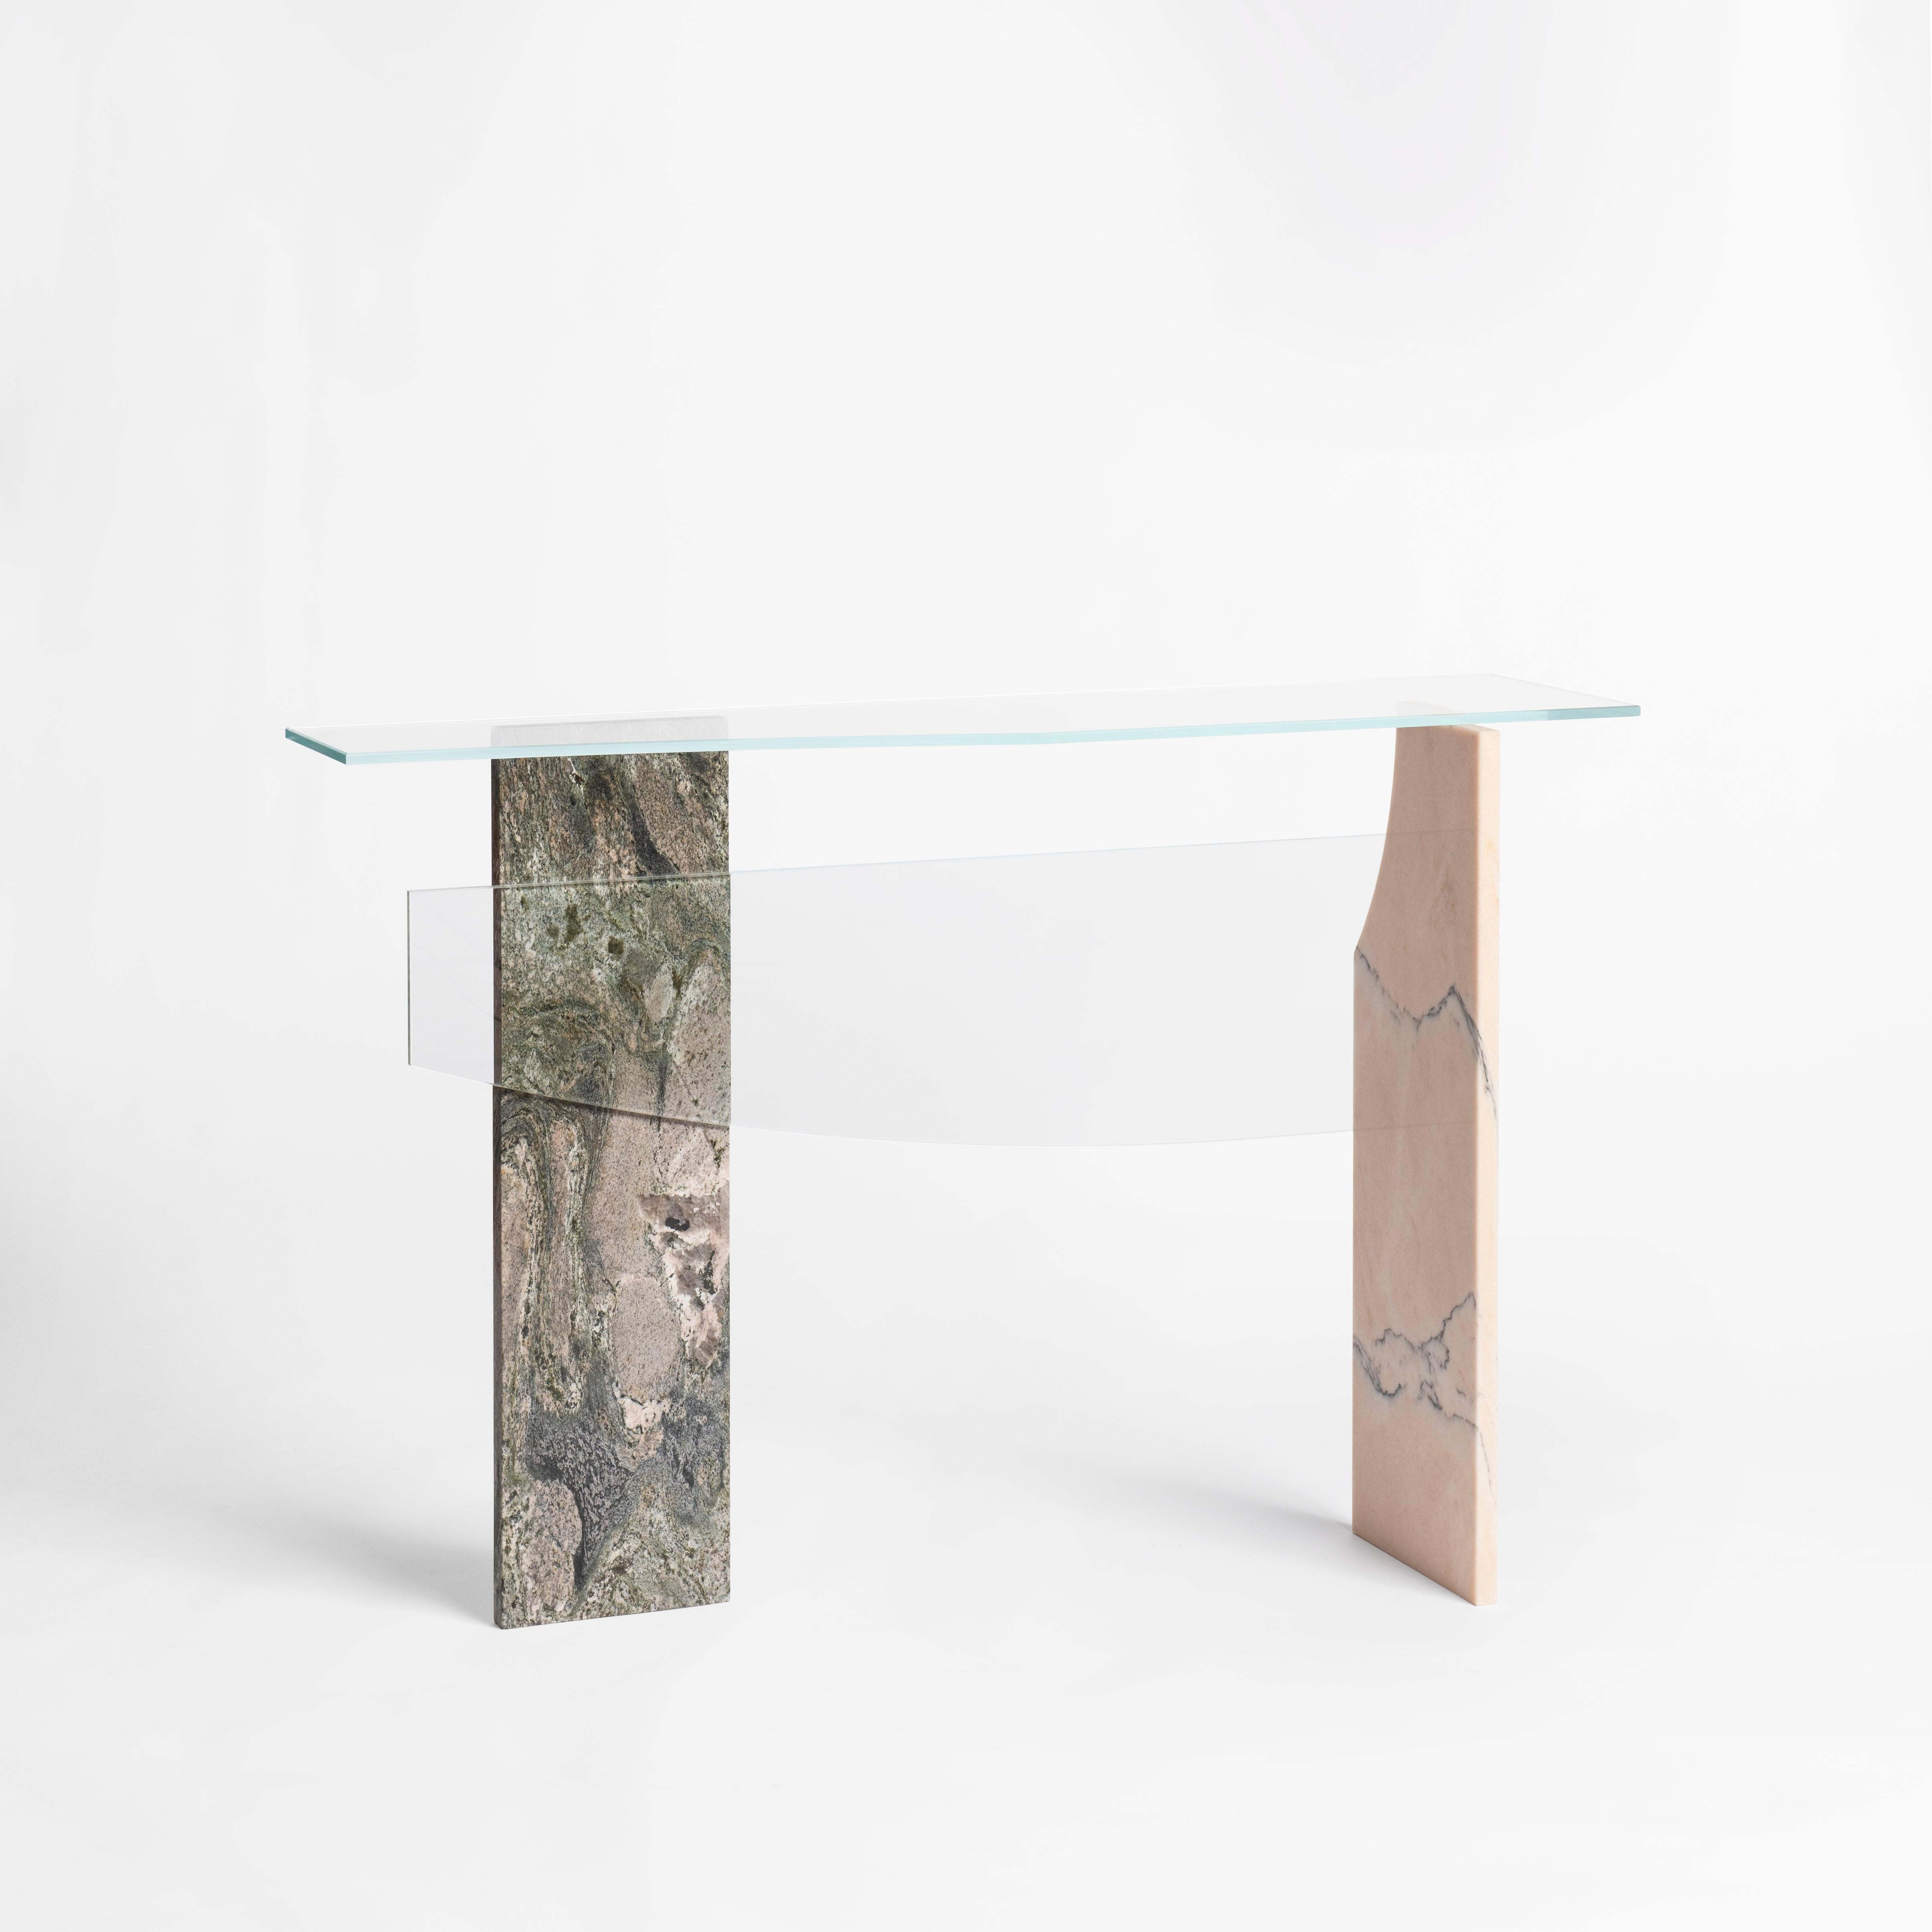 Delta C Console by Frederic Saulou.
Limited Edition of 4.
Materials: White glass, green marble from Italy, Yellow Valencia marble from Spain.
Dimensions: D 39 x W 140 x H 95 cm.
Signed and numbered.

